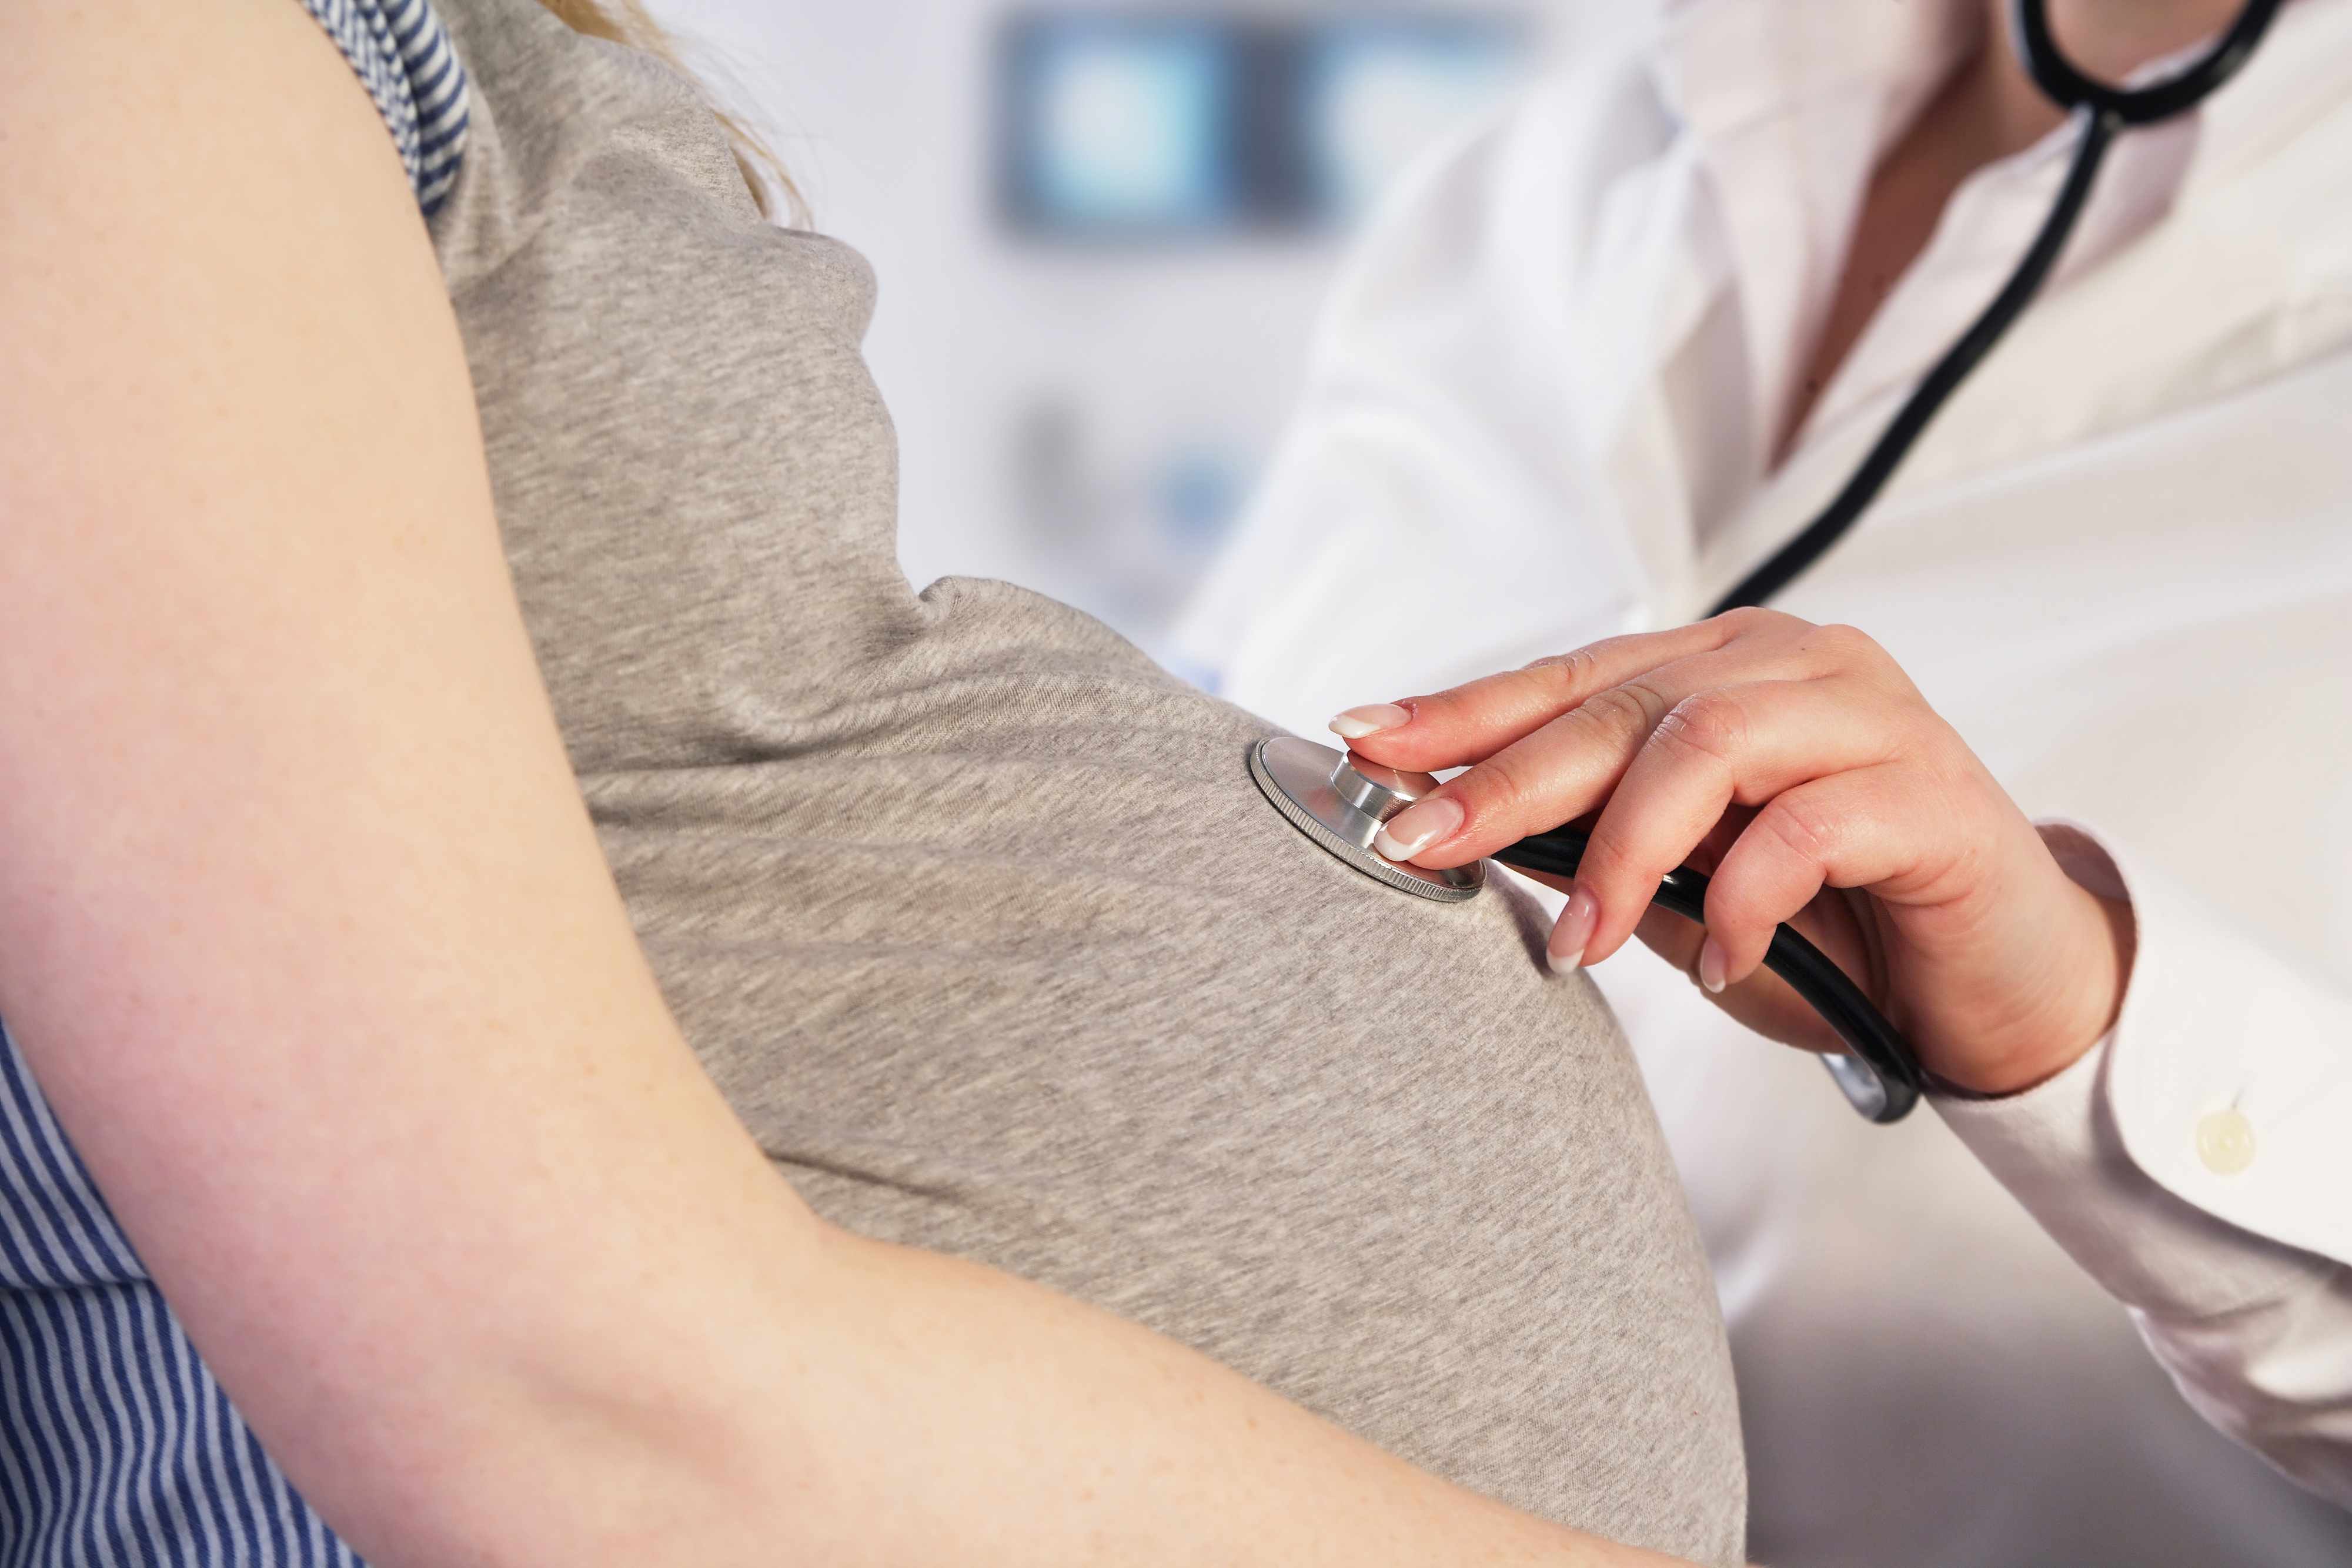 a pregnant women being examined at a doctor appointment with a stethoscope